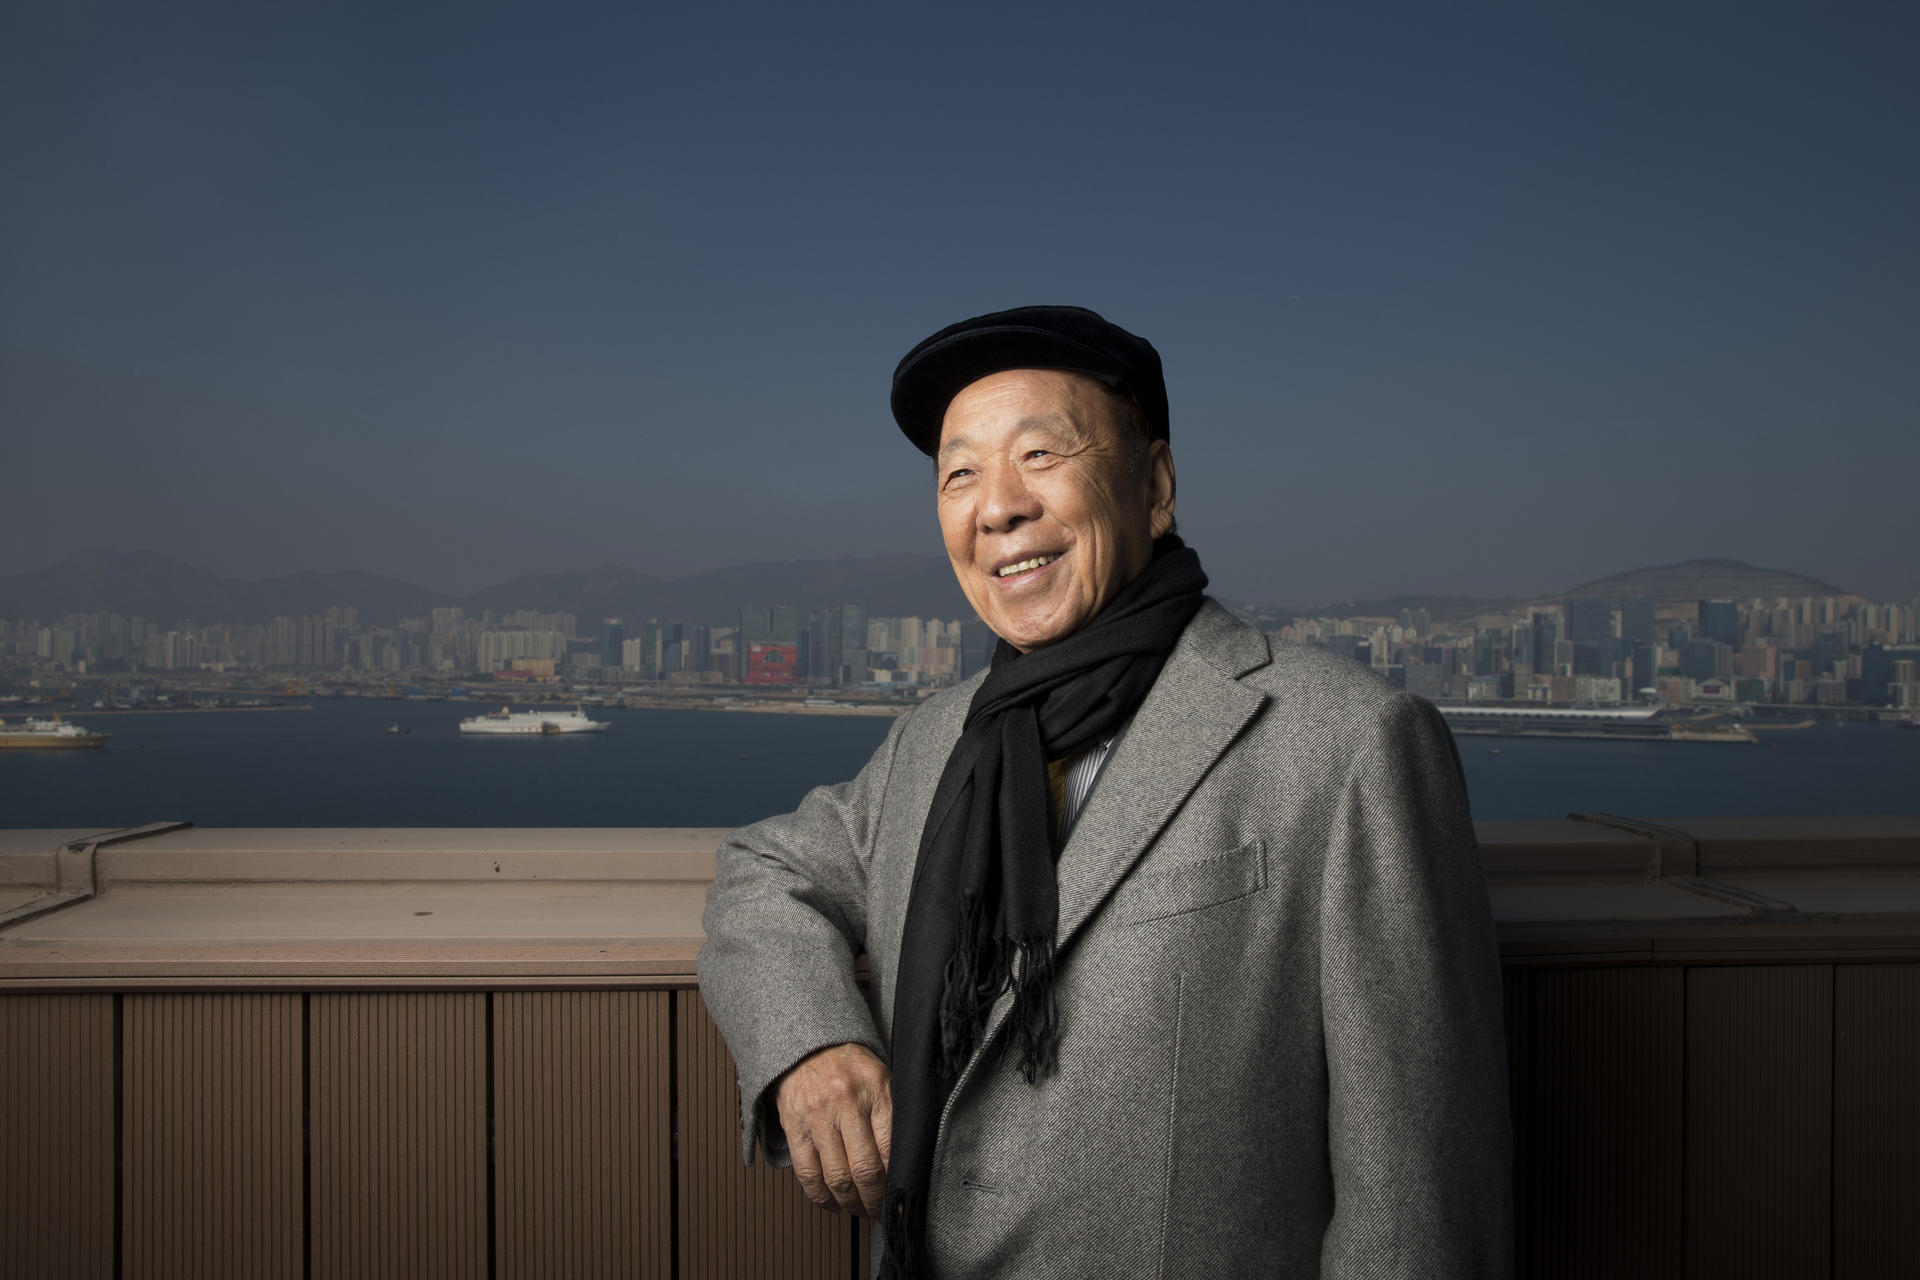 Lui Che-woo says he wants to do something meaningful with his life rather than retire and watch the sun rise and set. Photo: Bloomberg